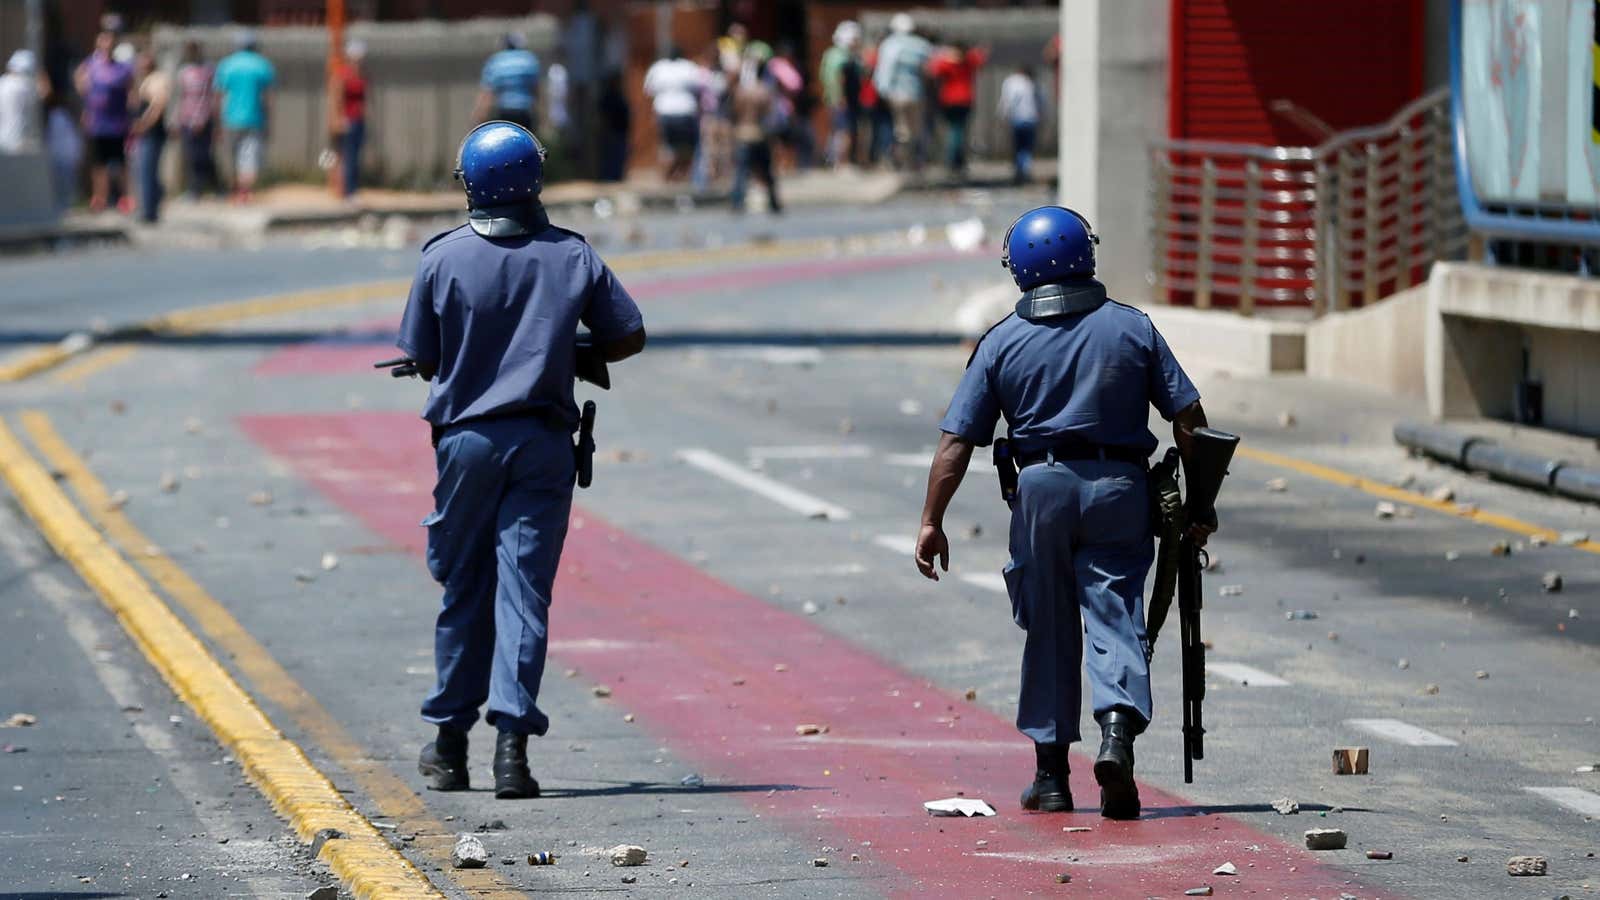 Police patrol down a rock strewn road during clashes with protesters in Johannesburg, South Africa, October 1, 2018.